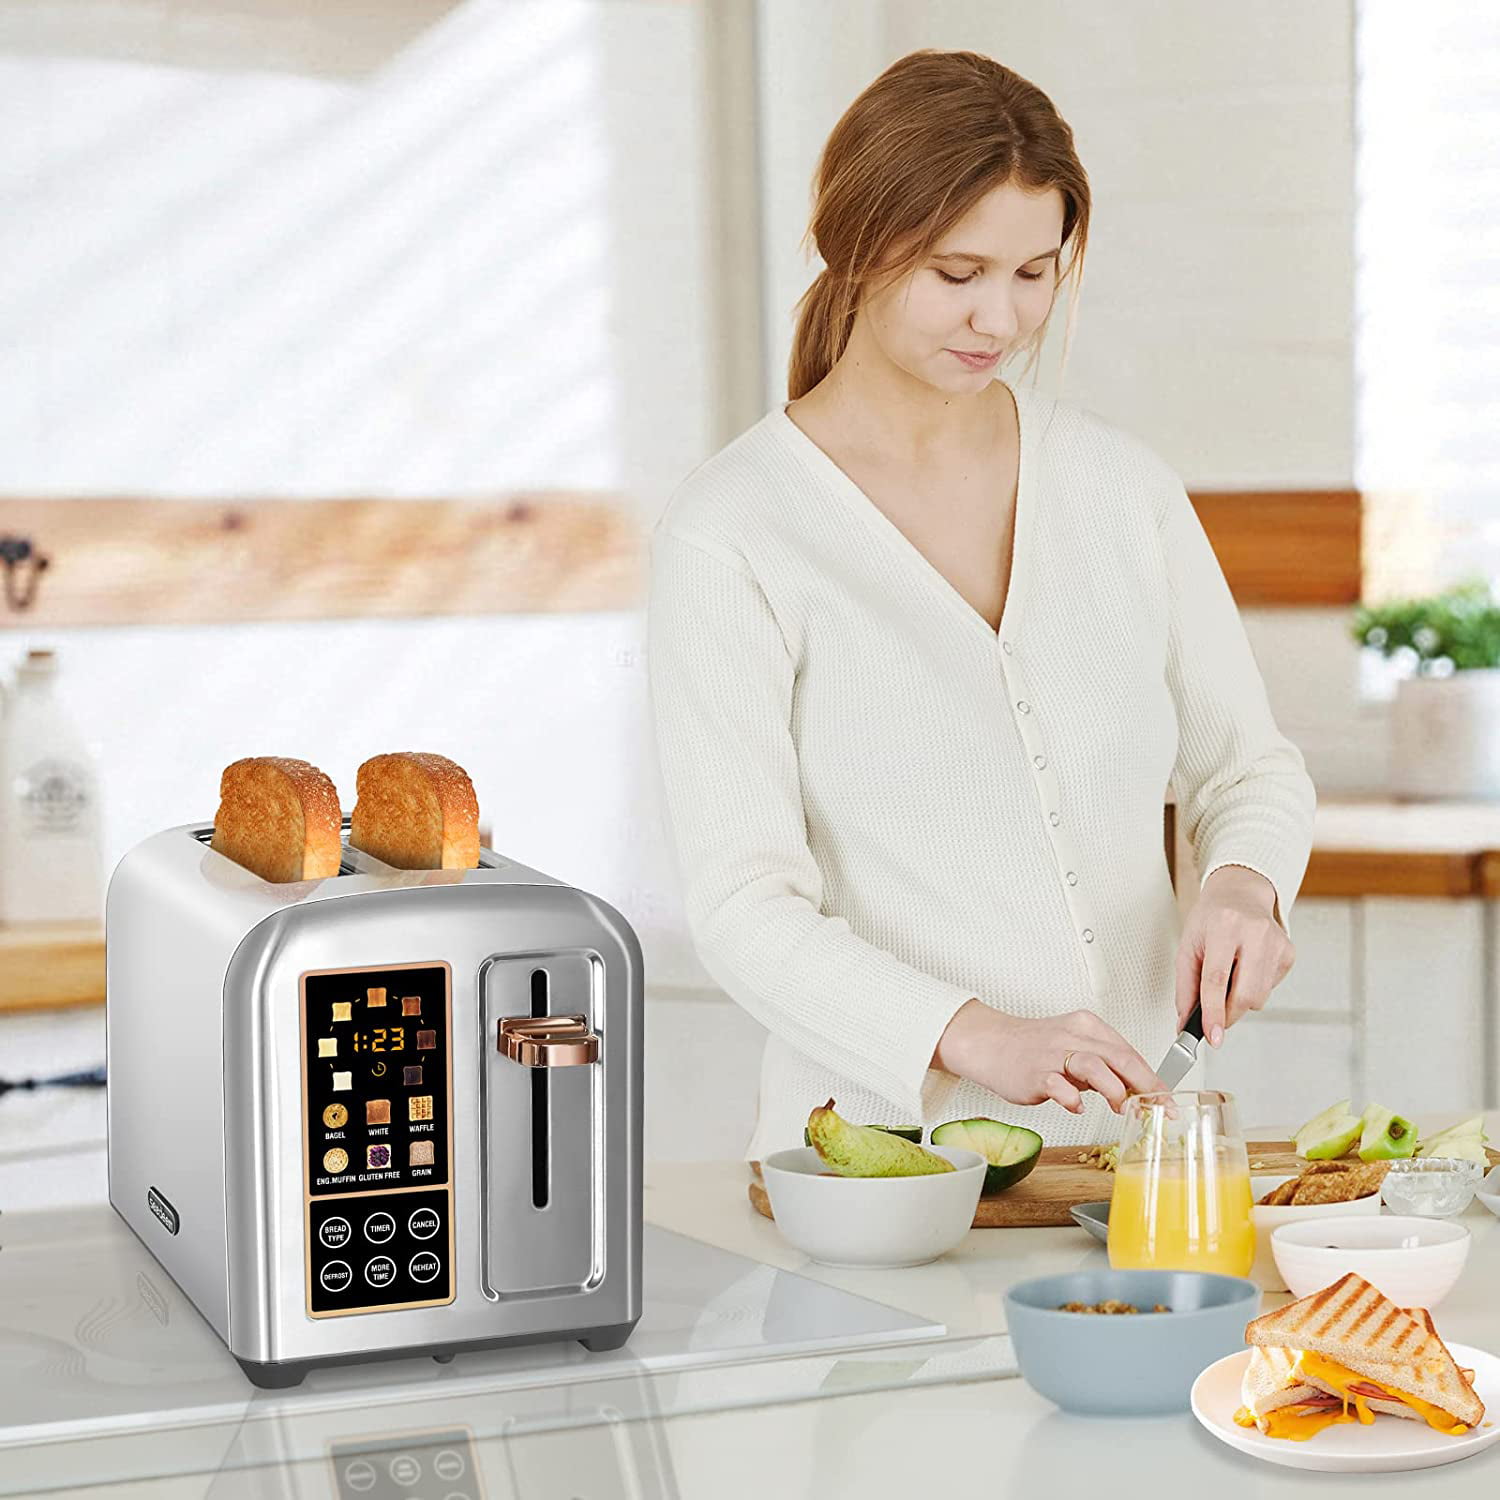 SEEDEEM Toaster 2 Slice, Stainless Toaster LCD Display&Touch Buttons, 50%  Faster Heating Speed, 6 Bread Selection, 7 Shade Setting, 1.5''Wide Slot